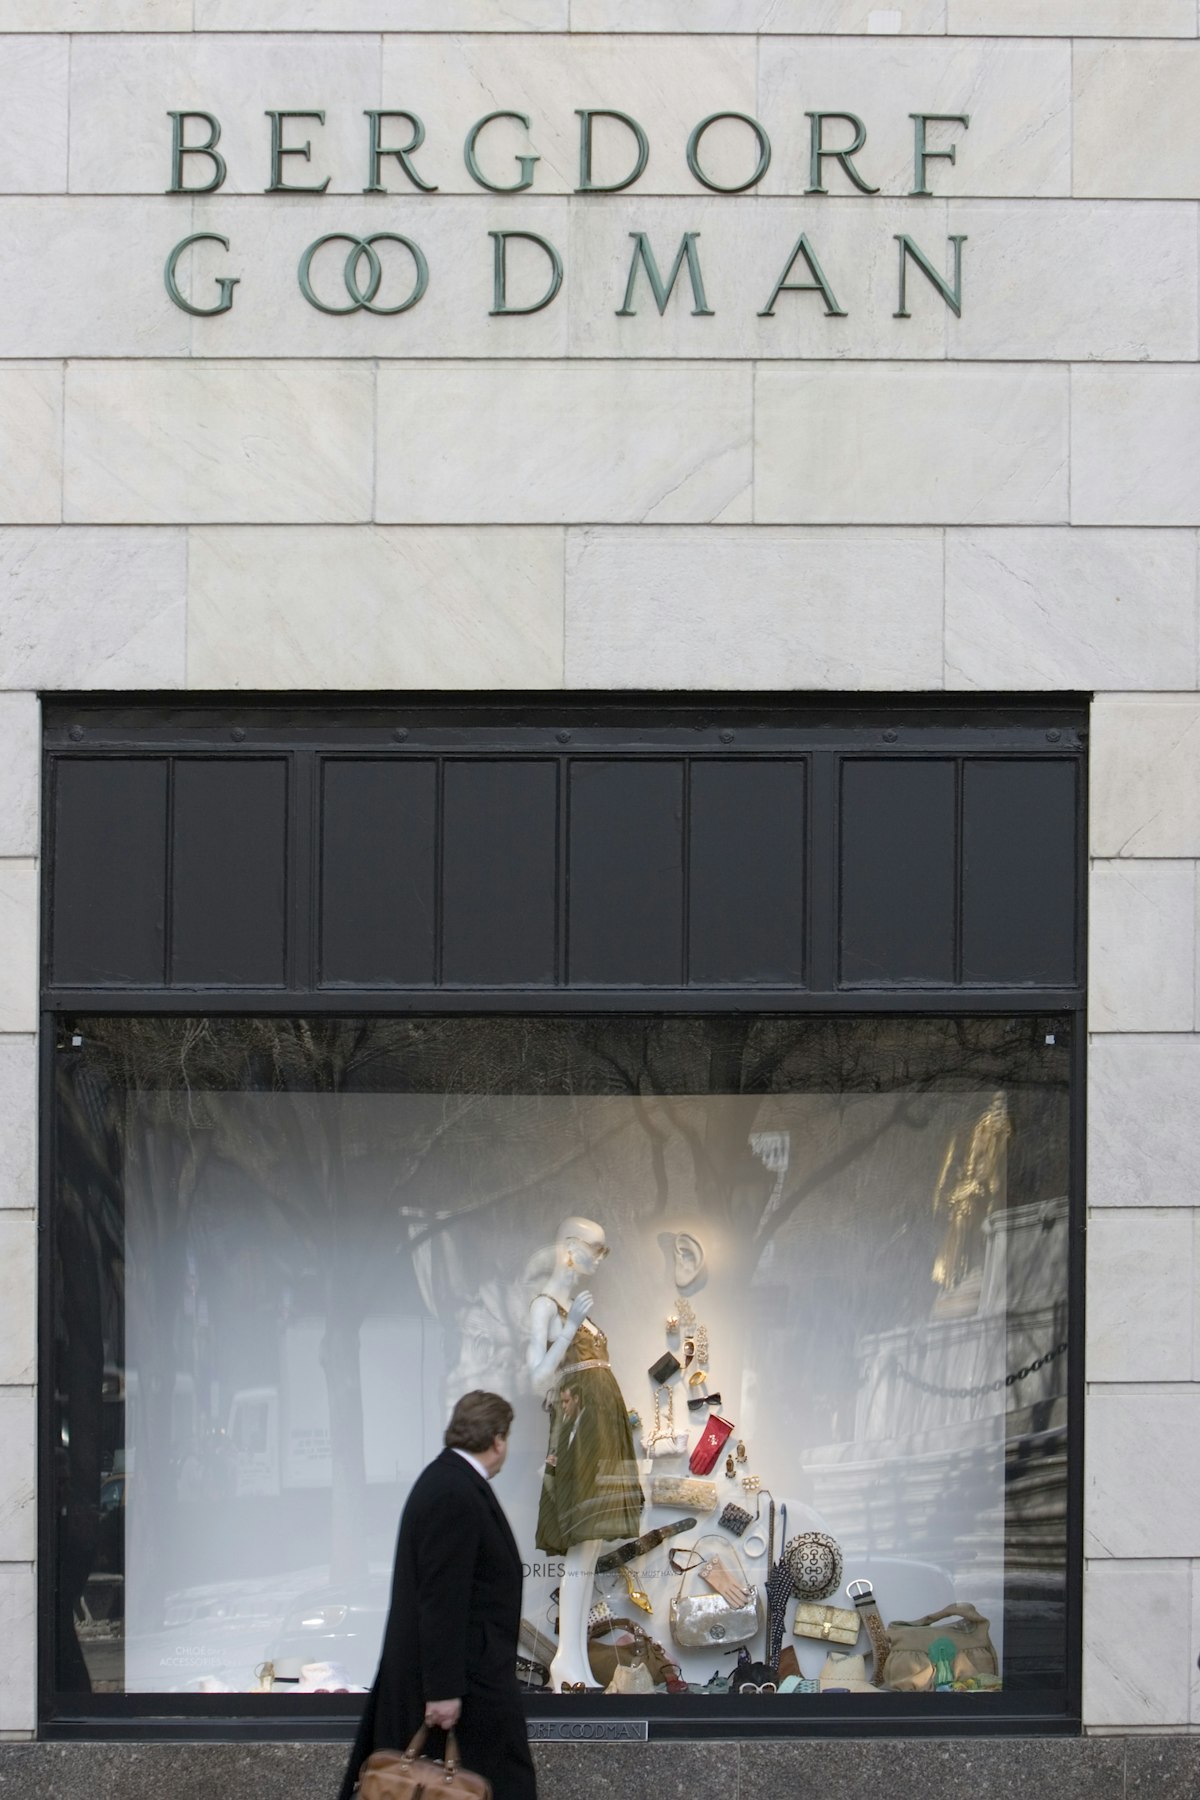 Bergdorf Goodman store on 56th and 5th Avenue.